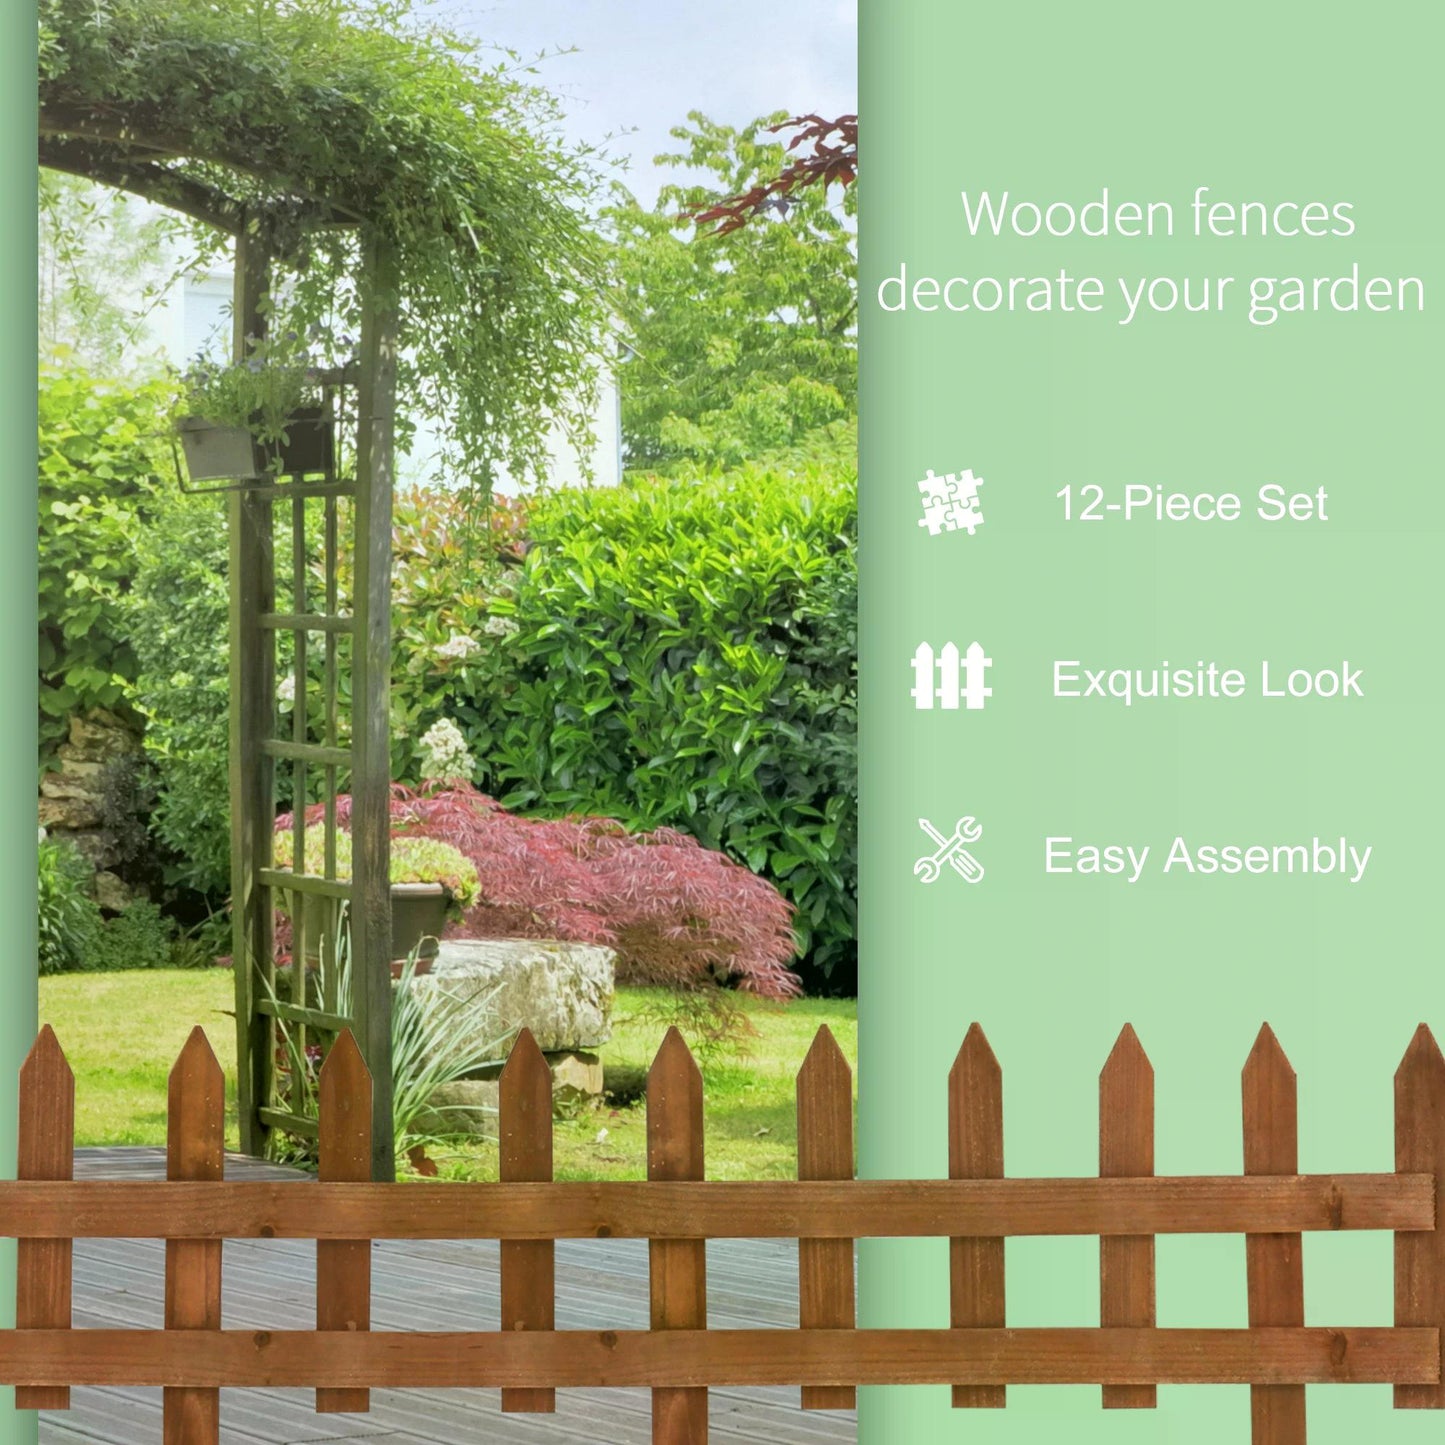 Outsunny 60L x 1D x 34H cm Pack of 12 Wooden Border Fences, Garden Fixed Picket Fence for Lawn Edging, Flowerbed, Brown